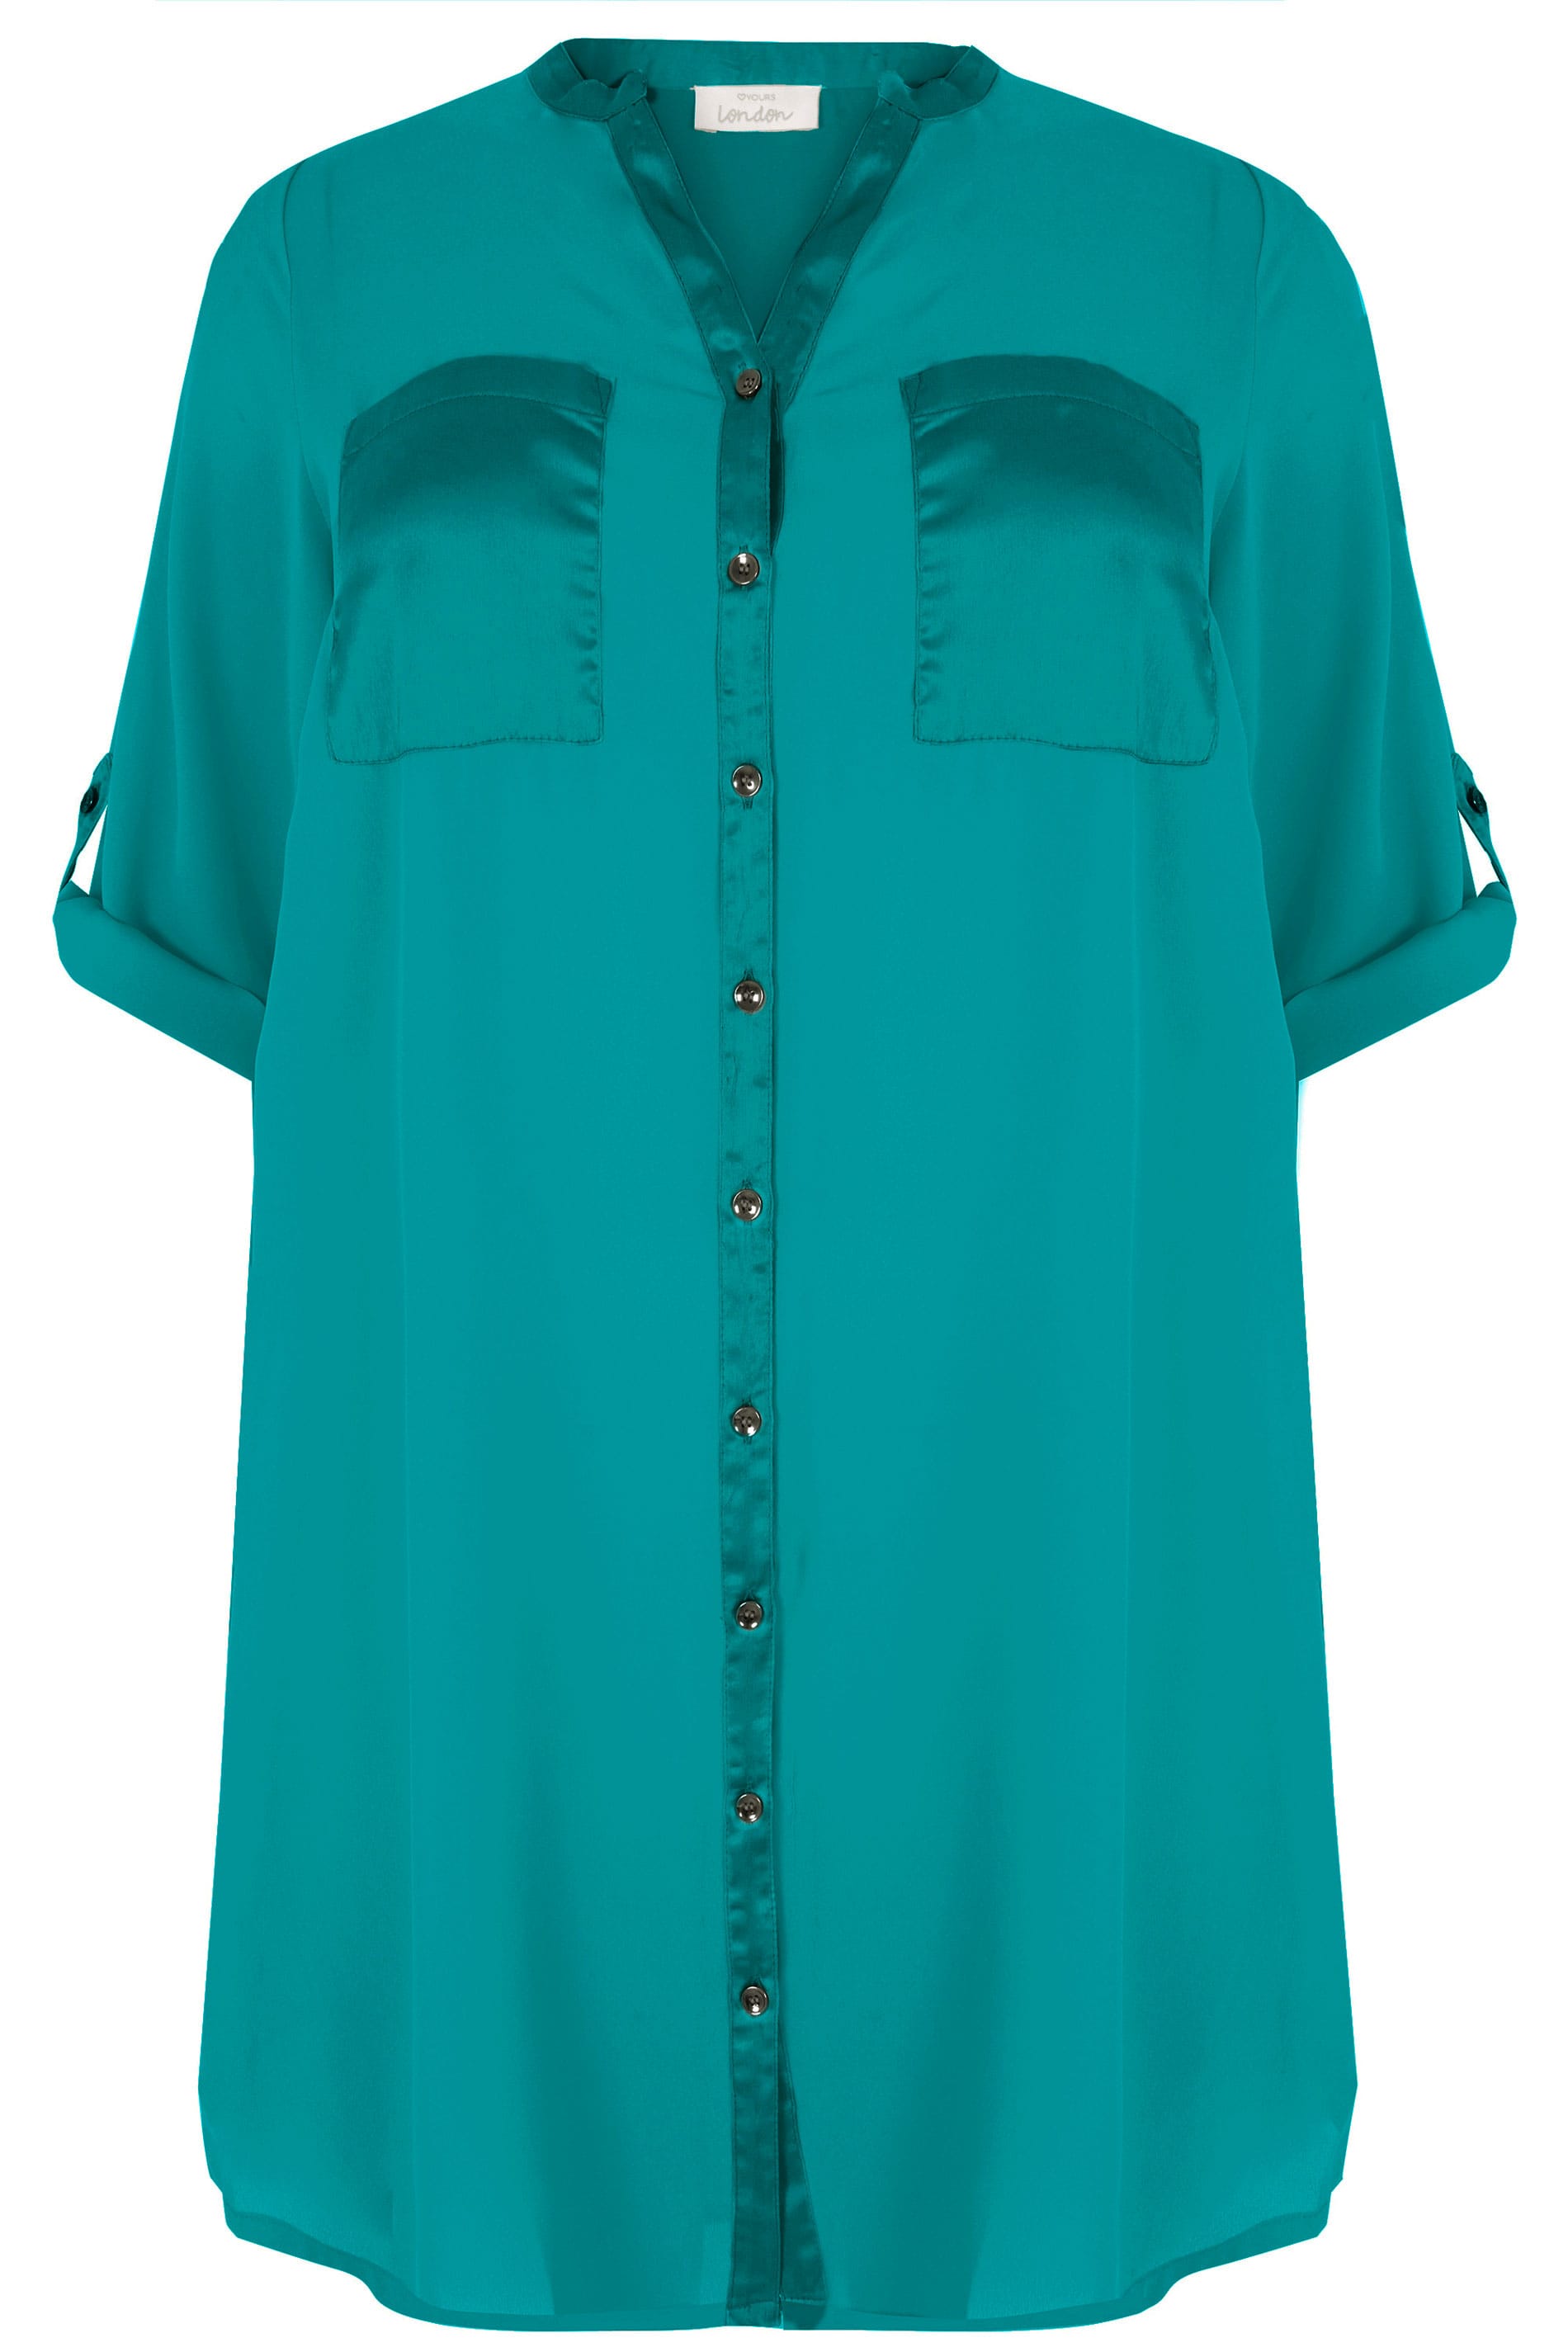 YOURS LONDON Teal Blue Chiffon Blouse With Satin Trim 